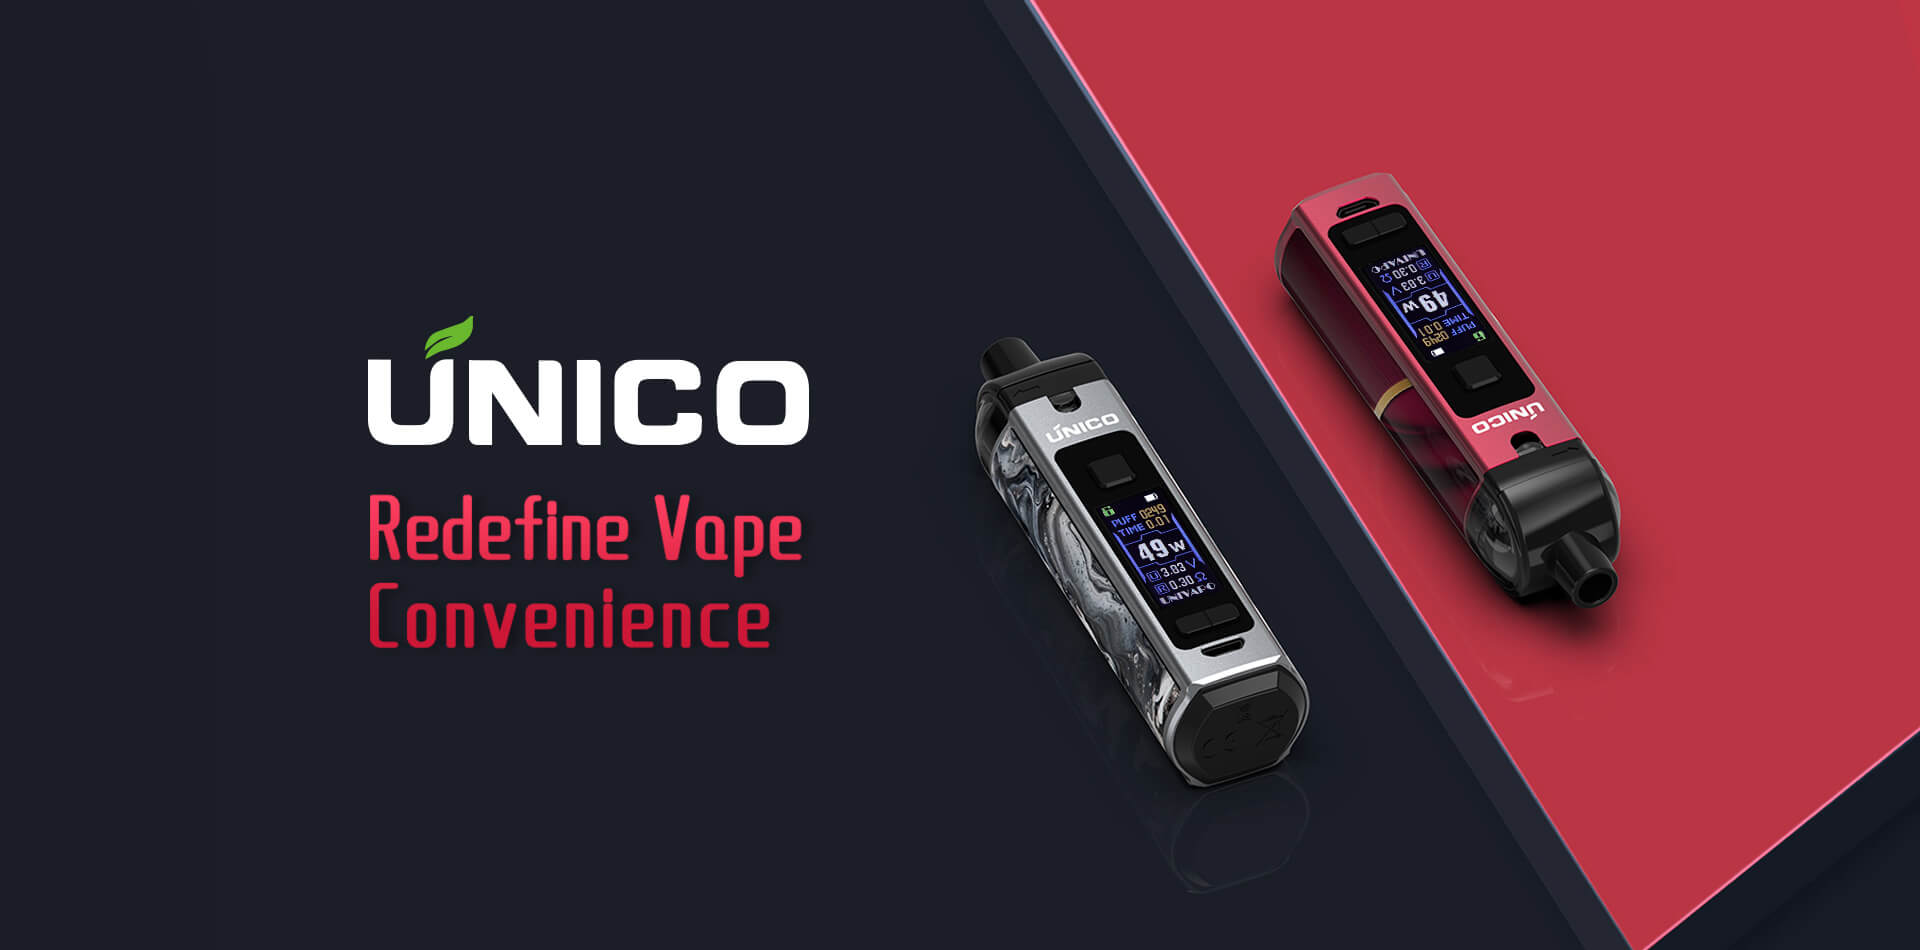 unico - 7 colors available - famous for its extraordinary convenient refilling system and dual PCB protective solutions,Unico is popular among both inexperienced and experienced vapers around the world.-9